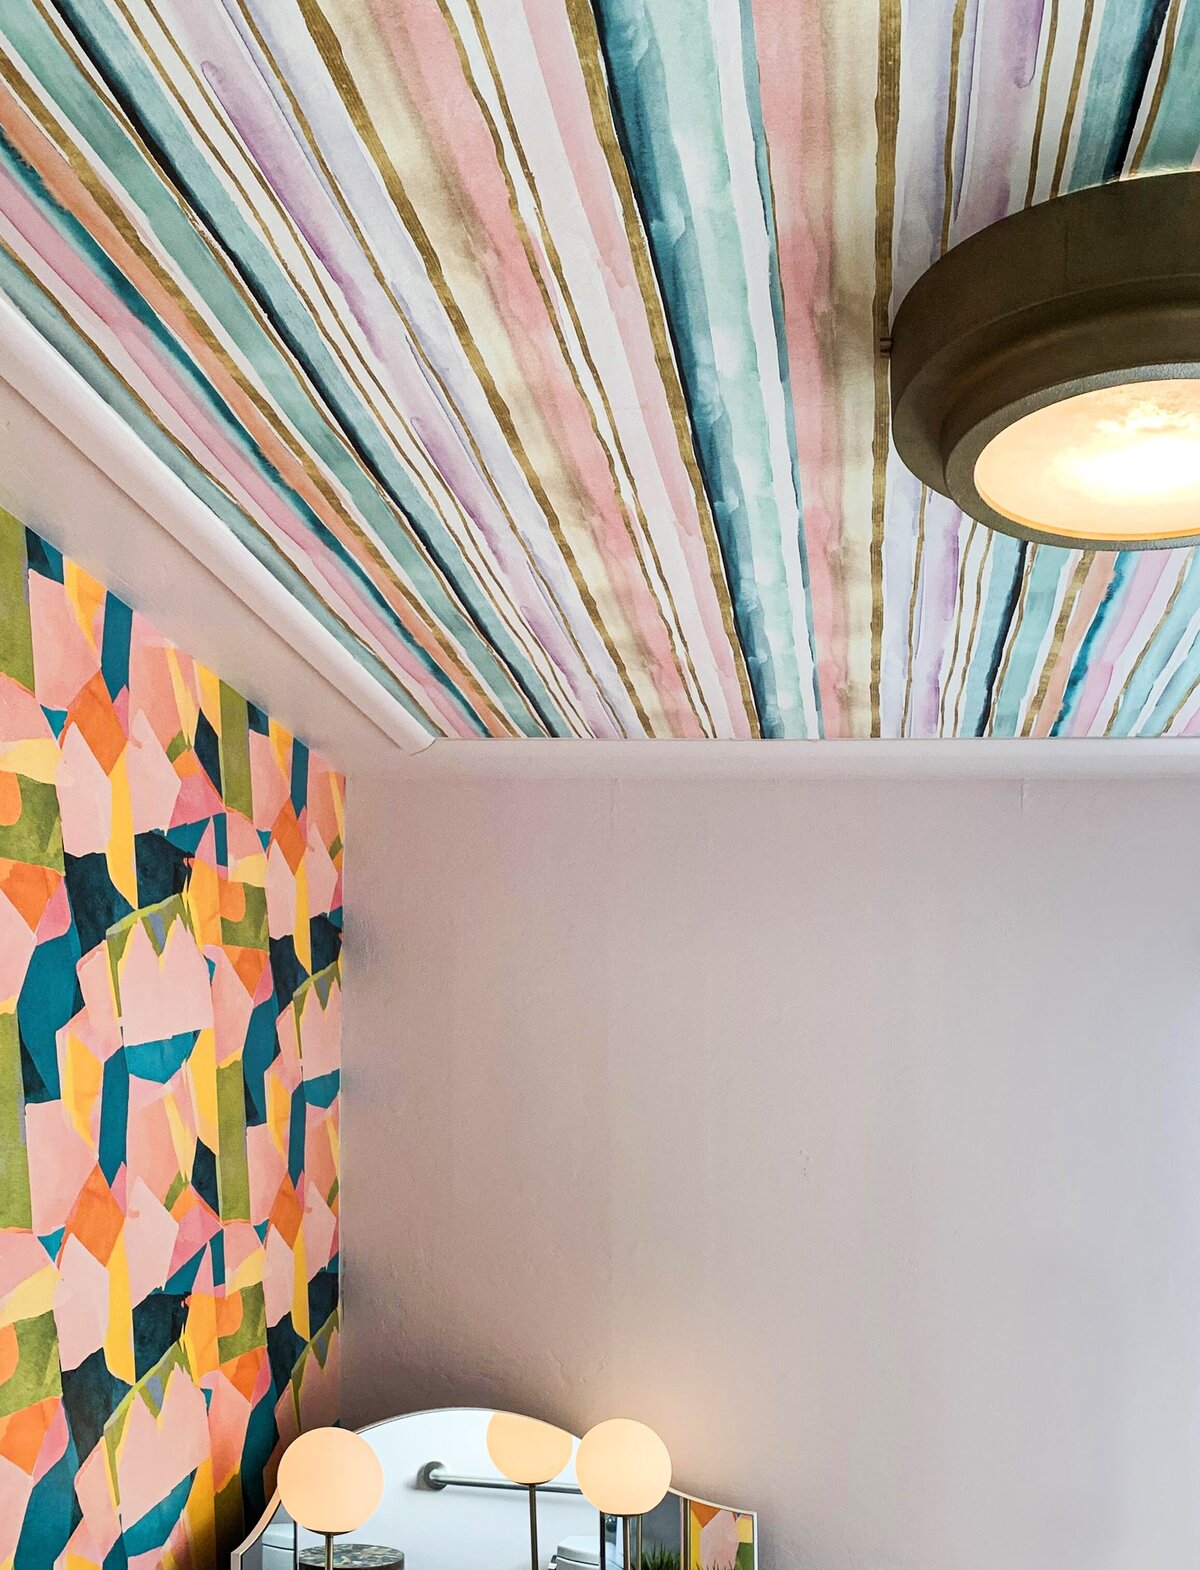 Salon design with colorful textured  wallpaper on ceiling and walls